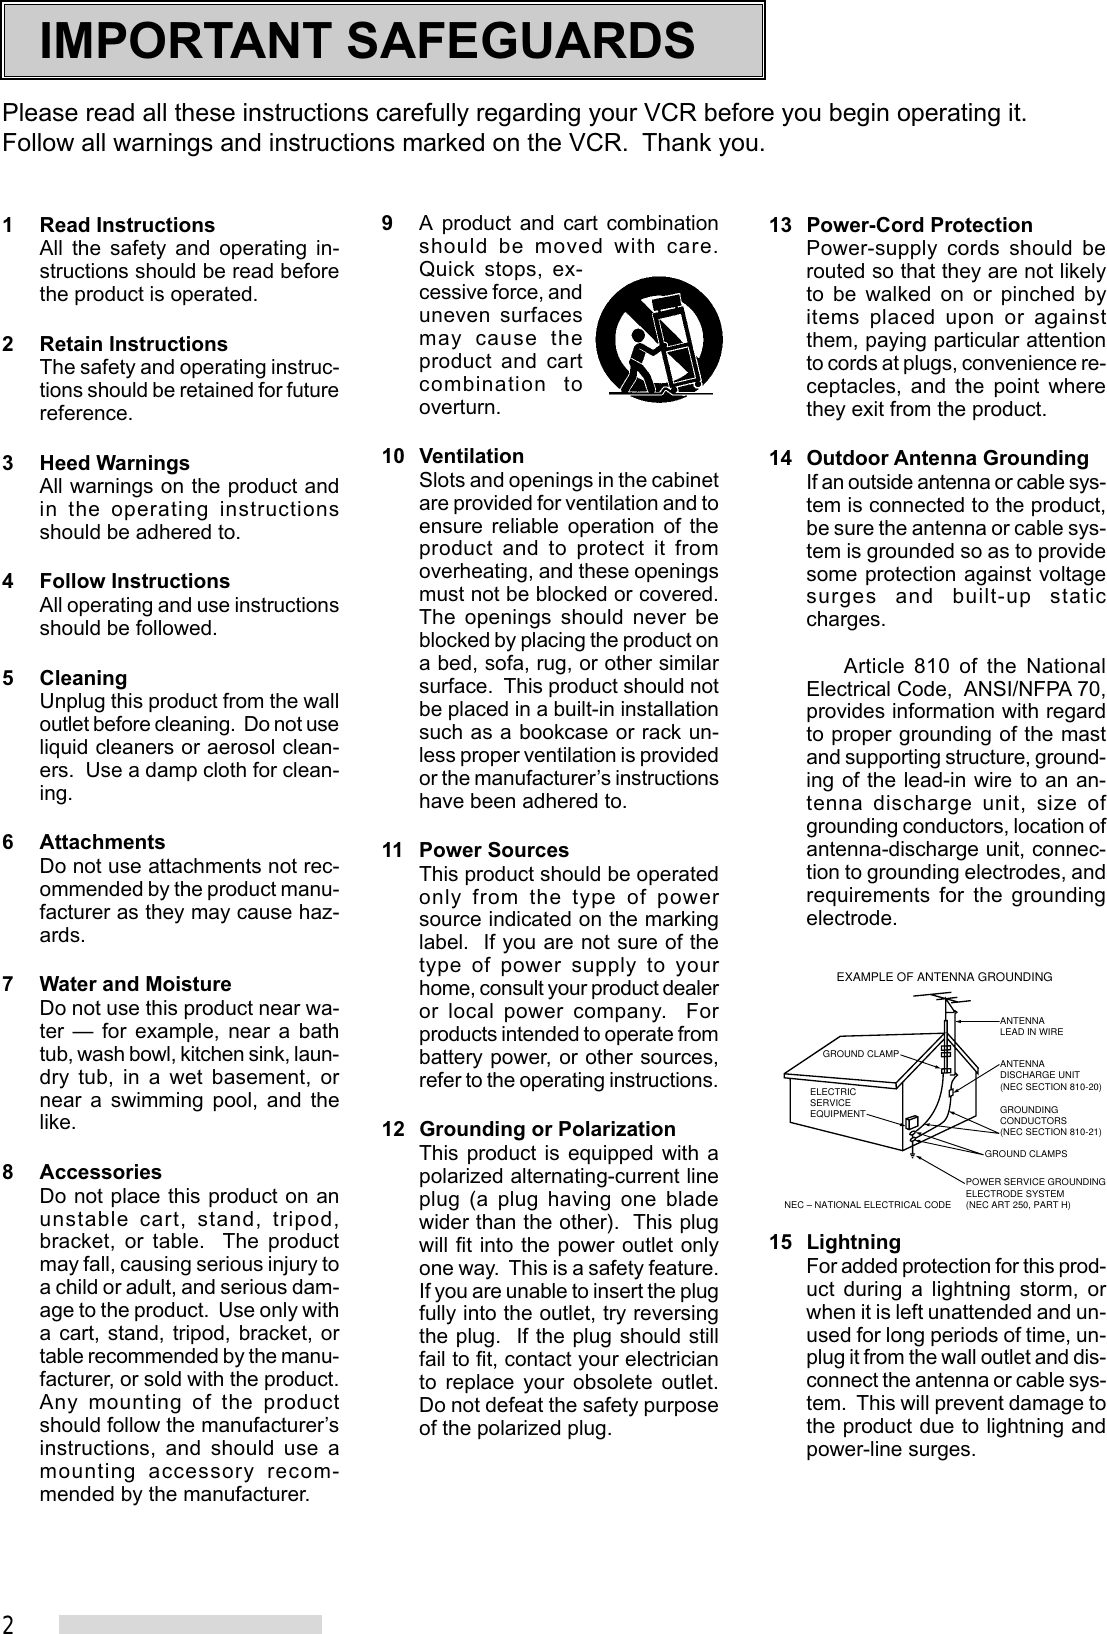 2IMPORTANT SAFEGUARDSPlease read all these instructions carefully regarding your VCR before you begin operating it.Follow all warnings and instructions marked on the VCR.  Thank you.1 Read InstructionsAll the safety and operating in-structions should be read beforethe product is operated.2 Retain InstructionsThe safety and operating instruc-tions should be retained for futurereference.3 Heed WarningsAll warnings on the product andin the operating instructionsshould be adhered to.4 Follow InstructionsAll operating and use instructionsshould be followed.5 CleaningUnplug this product from the walloutlet before cleaning.  Do not useliquid cleaners or aerosol clean-ers.  Use a damp cloth for clean-ing.6 AttachmentsDo not use attachments not rec-ommended by the product manu-facturer as they may cause haz-ards.7 Water and MoistureDo not use this product near wa-ter — for example, near a bathtub, wash bowl, kitchen sink, laun-dry tub, in a wet basement, ornear a swimming pool, and thelike.8 AccessoriesDo not place this product on anunstable cart, stand, tripod,bracket, or table.  The productmay fall, causing serious injury toa child or adult, and serious dam-age to the product.  Use only witha cart, stand, tripod, bracket, ortable recommended by the manu-facturer, or sold with the product.Any mounting of the productshould follow the manufacturer’sinstructions, and should use amounting accessory recom-mended by the manufacturer.9A product and cart combinationshould be moved with care.Quick stops, ex-cessive force, anduneven surfacesmay cause theproduct and cartcombination tooverturn.10 VentilationSlots and openings in the cabinetare provided for ventilation and toensure reliable operation of theproduct and to protect it fromoverheating, and these openingsmust not be blocked or covered.The openings should never beblocked by placing the product ona bed, sofa, rug, or other similarsurface.  This product should notbe placed in a built-in installationsuch as a bookcase or rack un-less proper ventilation is providedor the manufacturer’s instructionshave been adhered to.11 Power SourcesThis product should be operatedonly from the type of powersource indicated on the markinglabel.  If you are not sure of thetype of power supply to yourhome, consult your product dealeror local power company.  Forproducts intended to operate frombattery power, or other sources,refer to the operating instructions.12 Grounding or PolarizationThis product is equipped with apolarized alternating-current lineplug (a plug having one bladewider than the other).  This plugwill fit into the power outlet onlyone way.  This is a safety feature.If you are unable to insert the plugfully into the outlet, try reversingthe plug.  If the plug should stillfail to fit, contact your electricianto replace your obsolete outlet.Do not defeat the safety purposeof the polarized plug.13 Power-Cord ProtectionPower-supply cords should berouted so that they are not likelyto be walked on or pinched byitems placed upon or againstthem, paying particular attentionto cords at plugs, convenience re-ceptacles, and the point wherethey exit from the product.14 Outdoor Antenna GroundingIf an outside antenna or cable sys-tem is connected to the product,be sure the antenna or cable sys-tem is grounded so as to providesome protection against voltagesurges and built-up staticcharges.Article 810 of the NationalElectrical Code,  ANSI/NFPA 70,provides information with regardto proper grounding of the mastand supporting structure, ground-ing of the lead-in wire to an an-tenna discharge unit, size ofgrounding conductors, location ofantenna-discharge unit, connec-tion to grounding electrodes, andrequirements for the groundingelectrode.15 LightningFor added protection for this prod-uct during a lightning storm, orwhen it is left unattended and un-used for long periods of time, un-plug it from the wall outlet and dis-connect the antenna or cable sys-tem.  This will prevent damage tothe product due to lightning andpower-line surges.ANTENNALEAD IN WIREANTENNADISCHARGE UNIT(NEC SECTION 810-20)GROUNDINGCONDUCTORS(NEC SECTION 810-21)GROUND CLAMPSPOWER SERVICE GROUNDINGELECTRODE SYSTEM(NEC ART 250, PART H)GROUND CLAMPELECTRICSERVICEEQUIPMENTNEC – NATIONAL ELECTRICAL CODEEXAMPLE OF ANTENNA GROUNDING